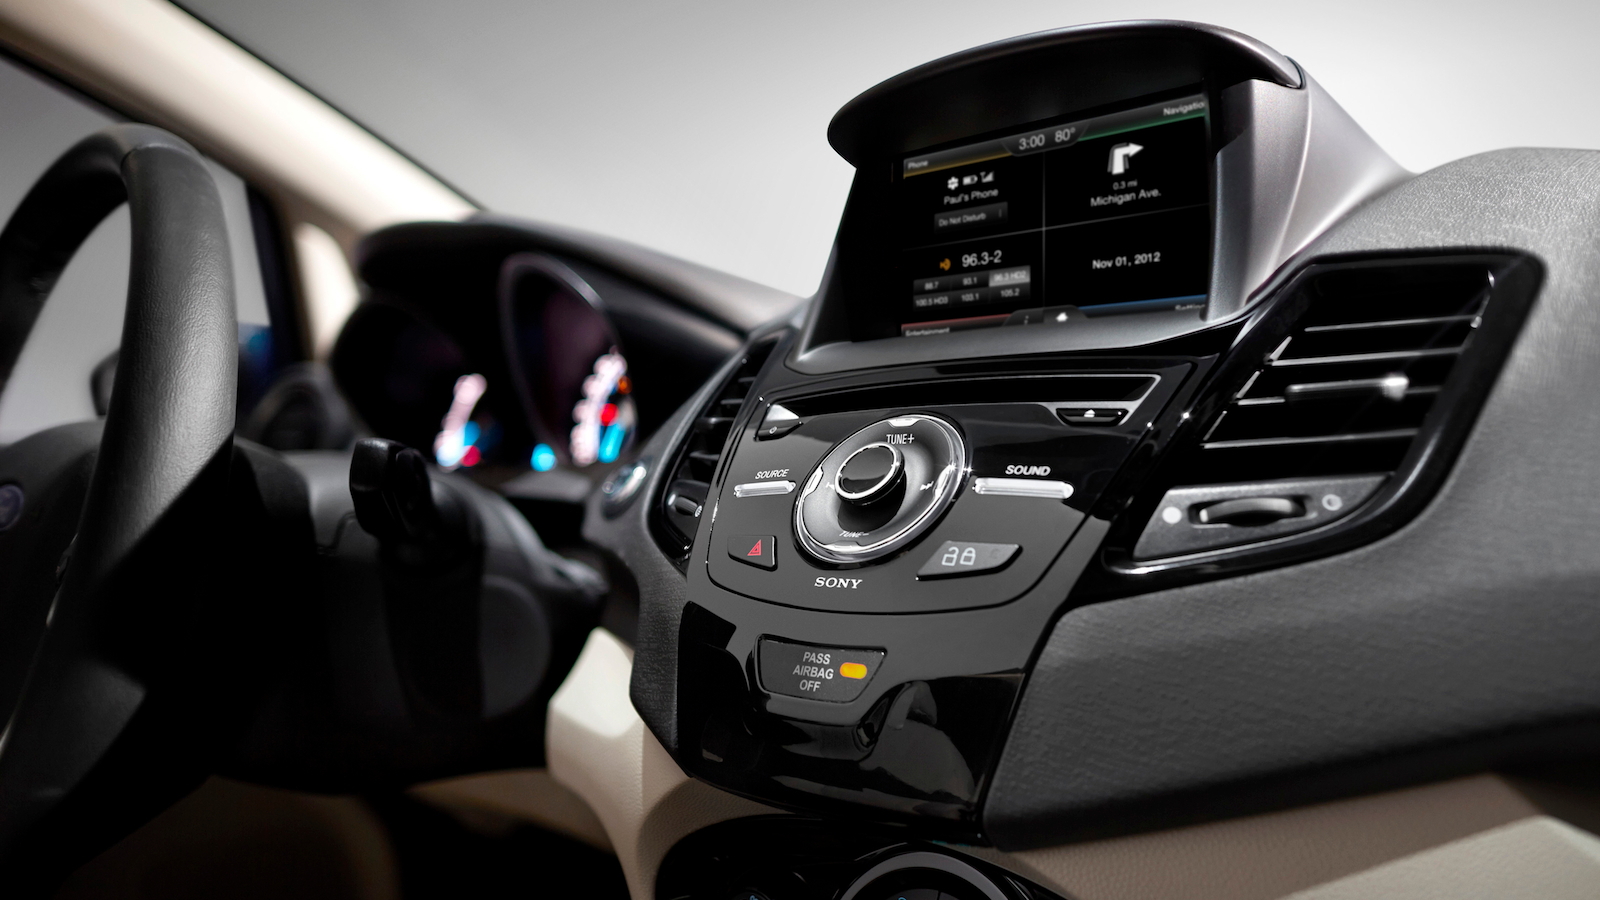 MyFord Touch system in the 2014 Ford Fiesta - image: Ford Motor Company